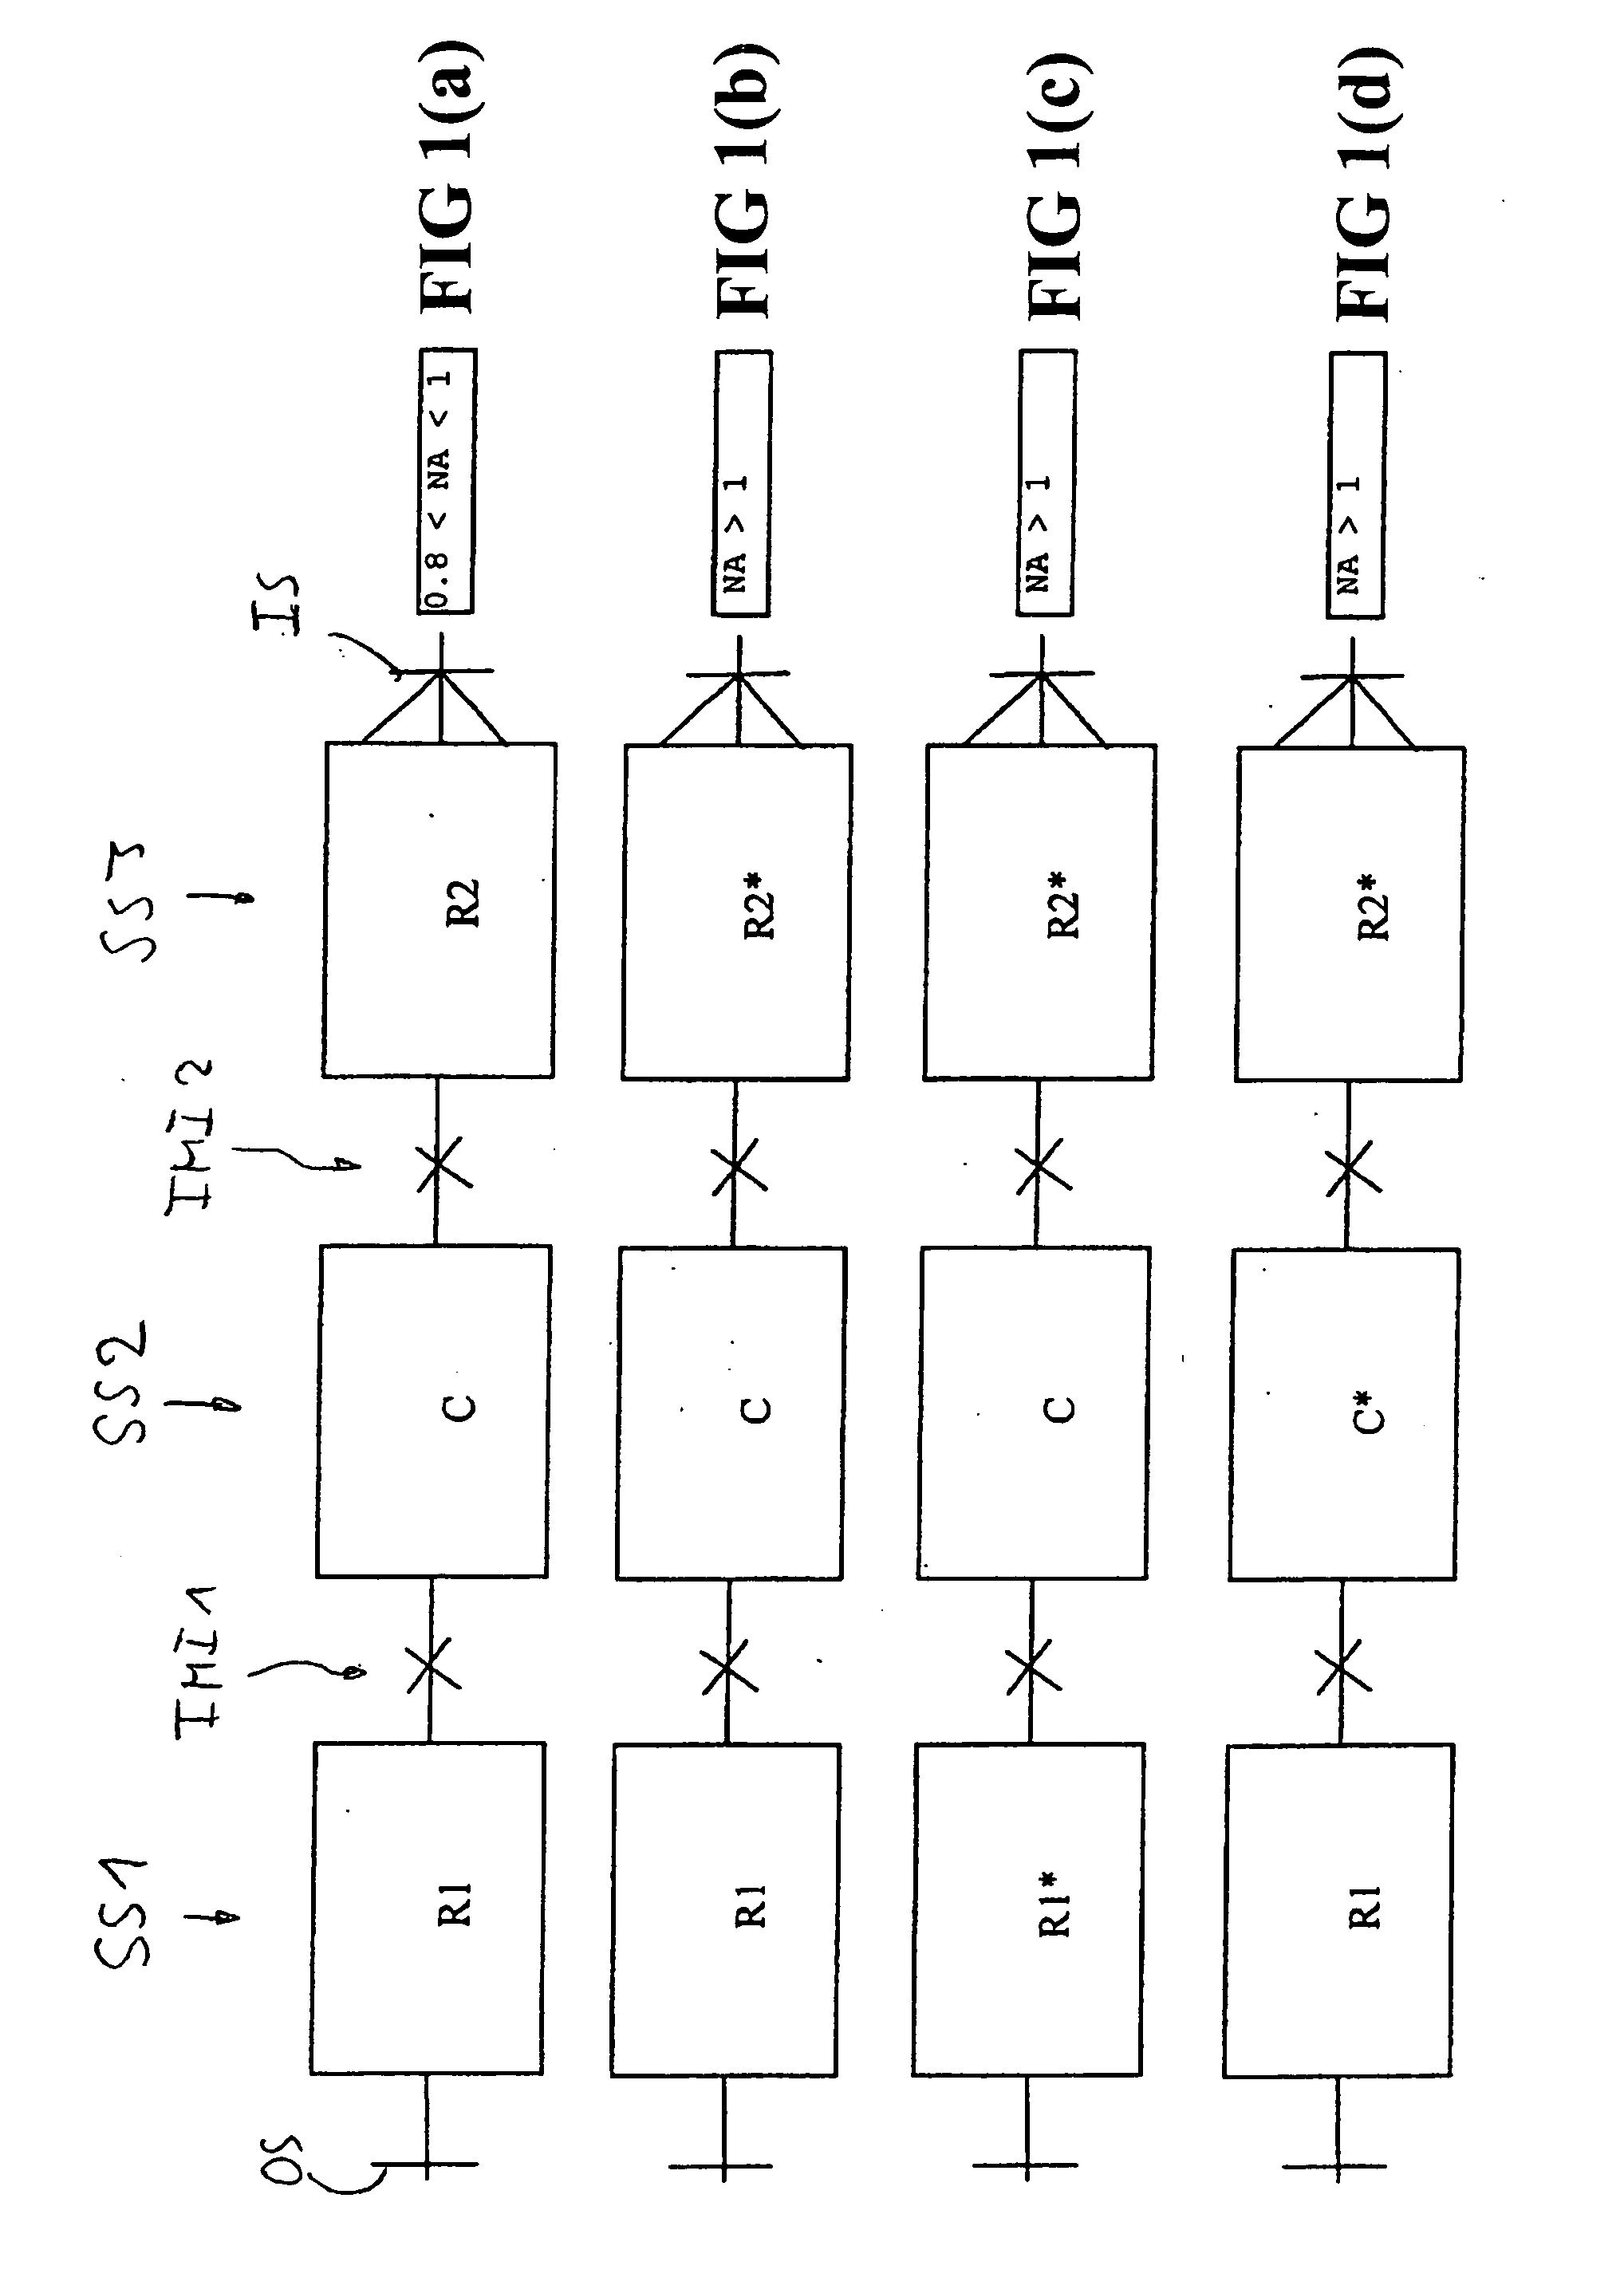 Method of manufacturing projection objectives and set of projection objectives manufactured by that method